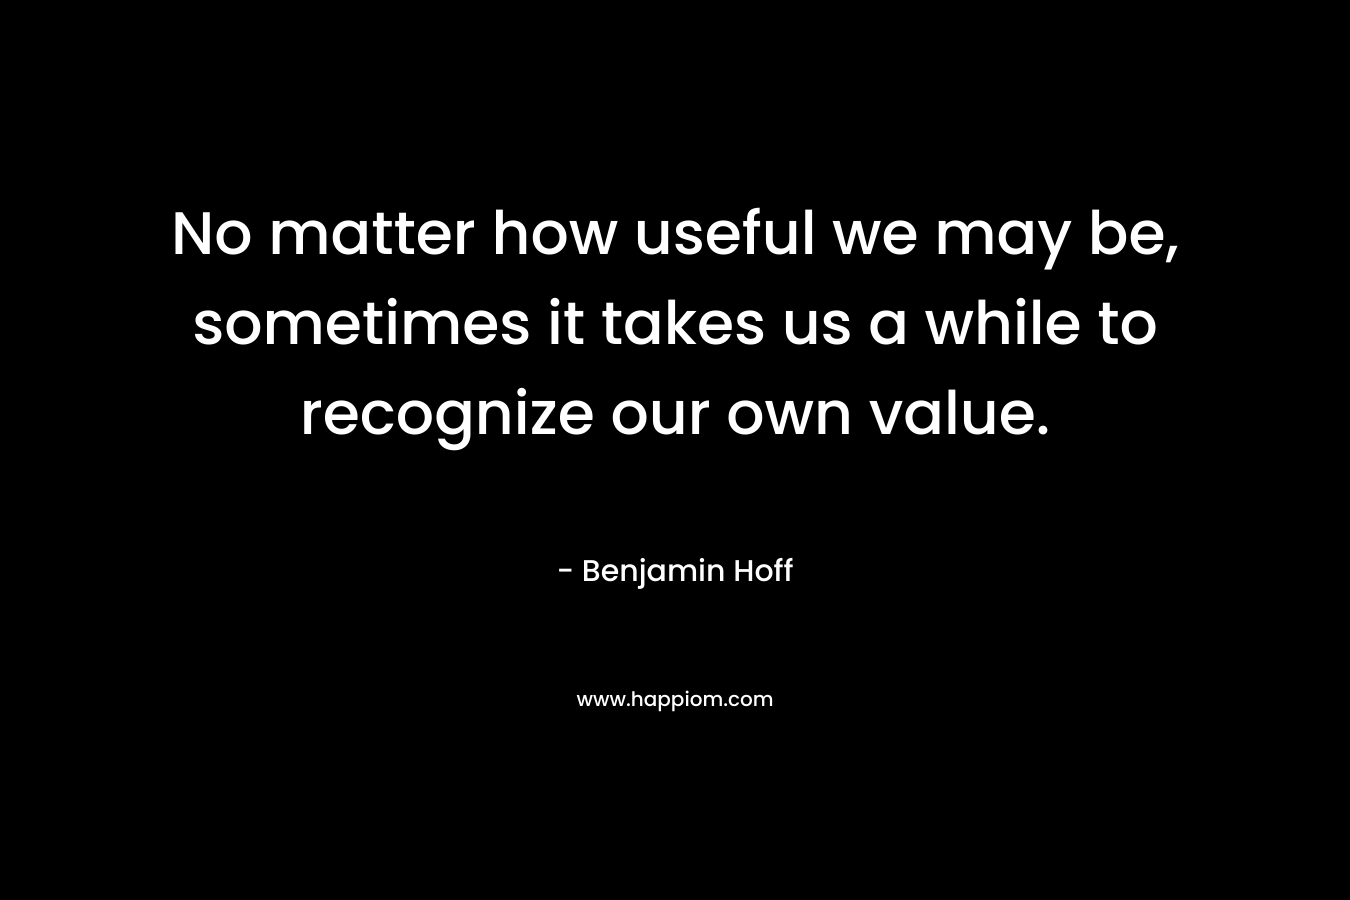 No matter how useful we may be, sometimes it takes us a while to recognize our own value. – Benjamin Hoff